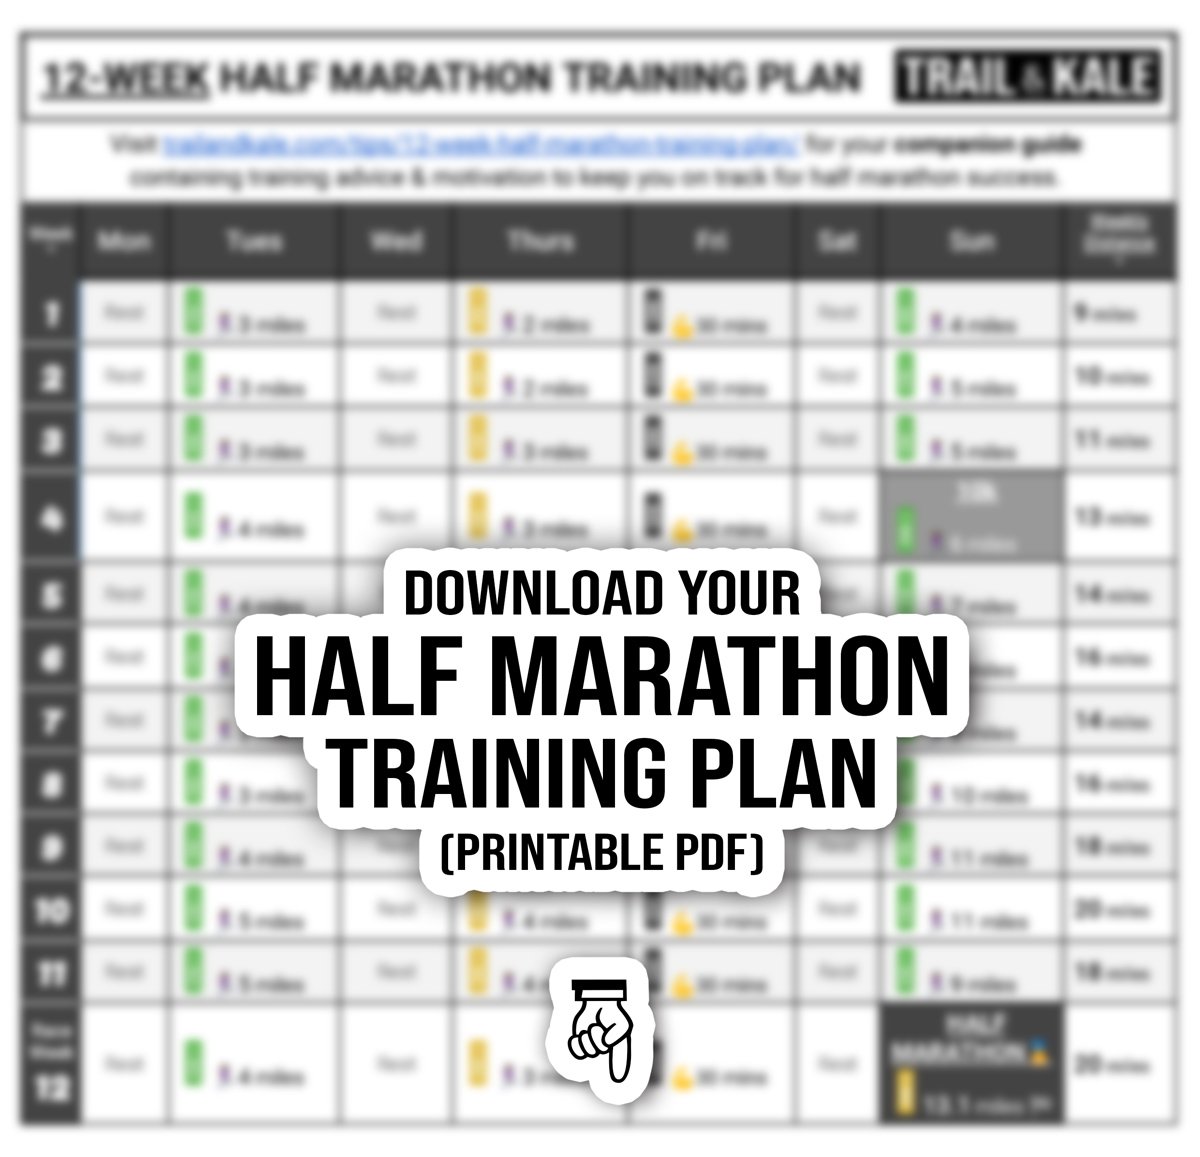 12 WEEK HALF MARATHON TRAINING PLAN TRAIL AND KALE click to unlock out of focus